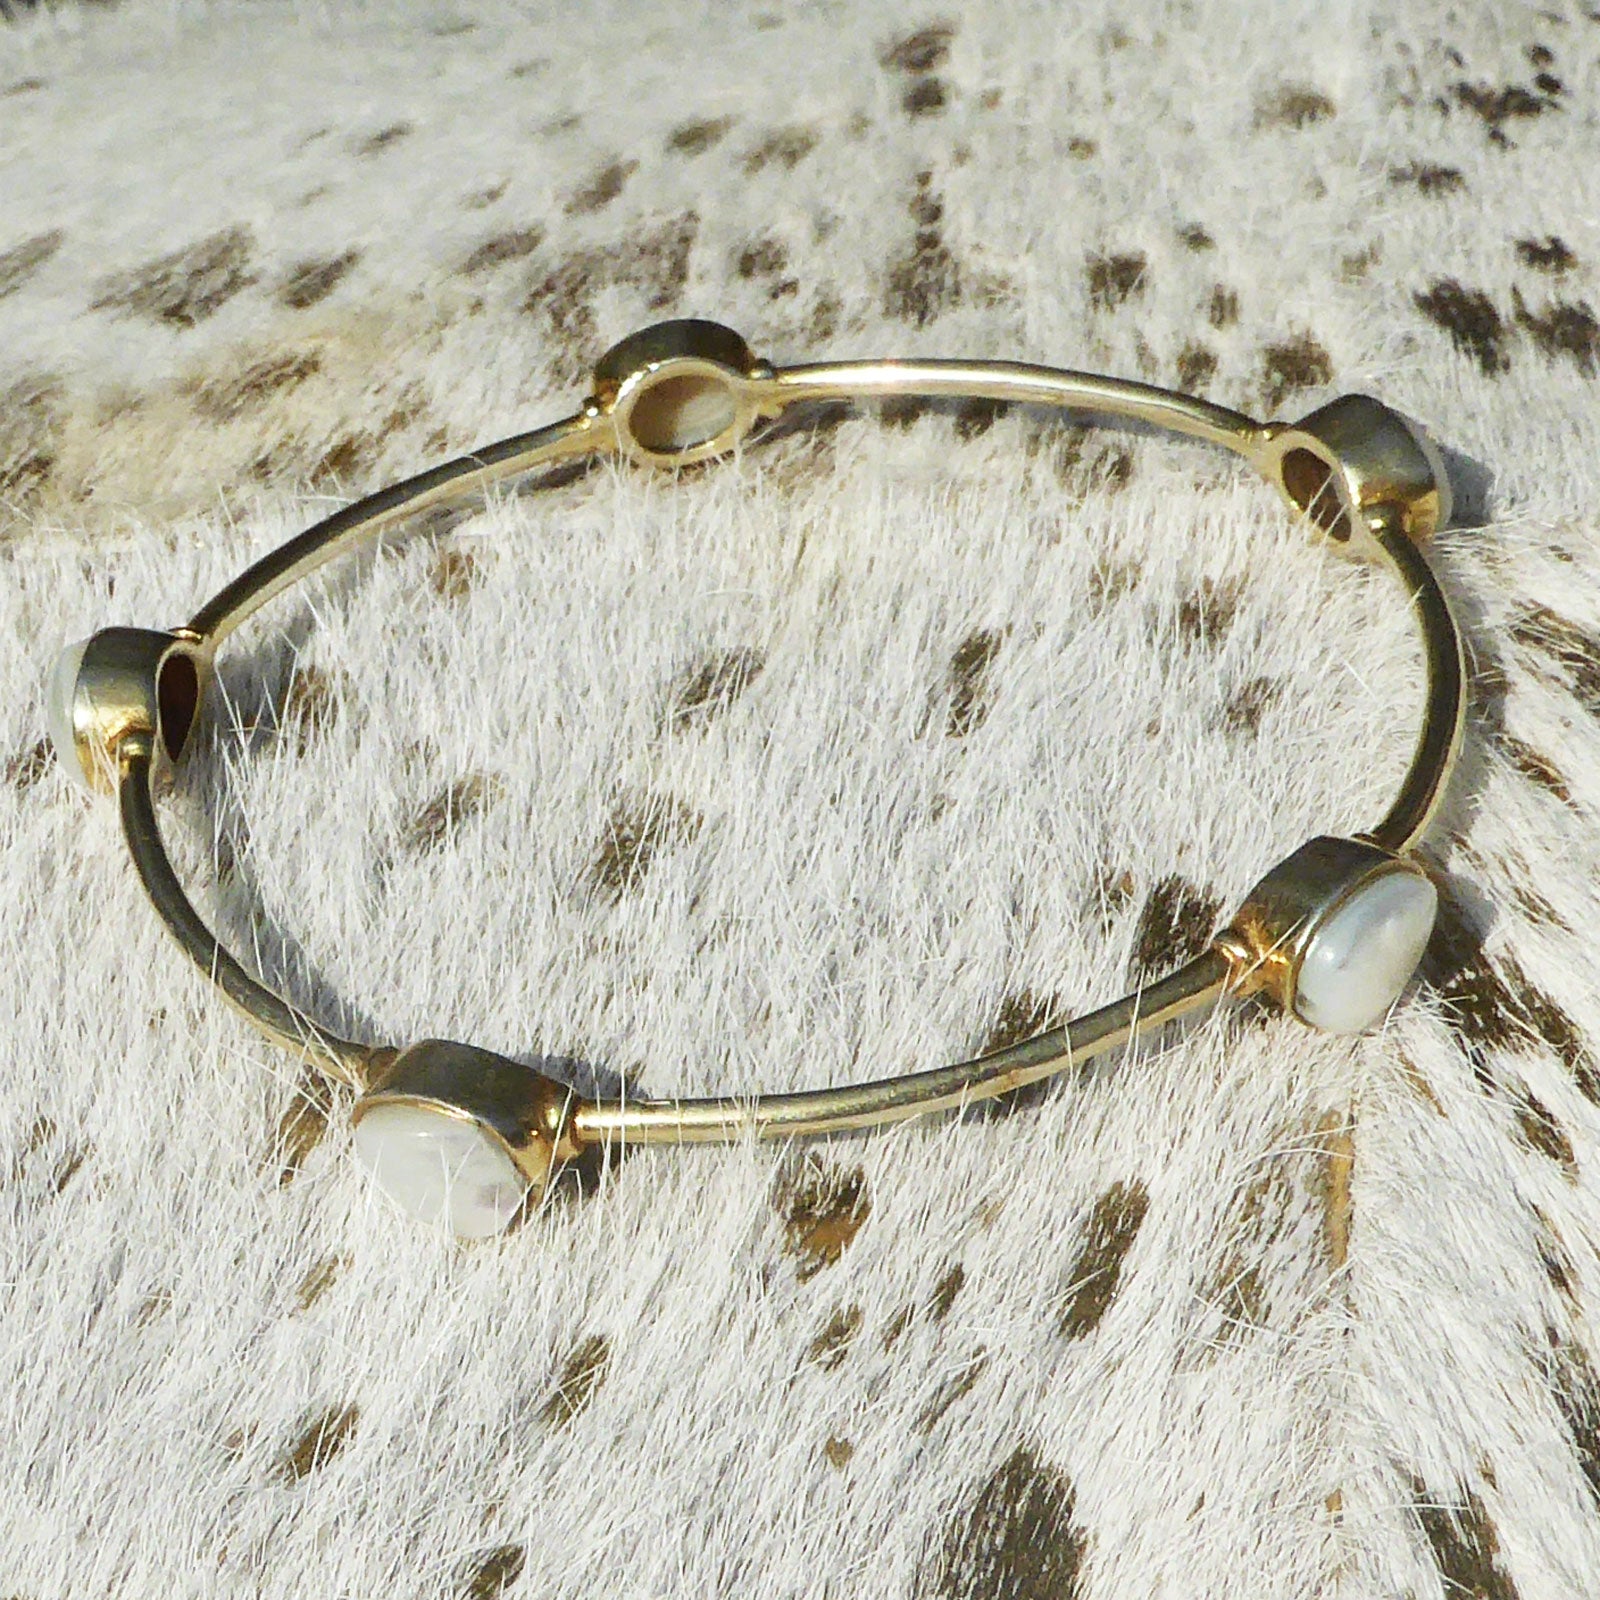 Brass bangle set with freshwater pearls